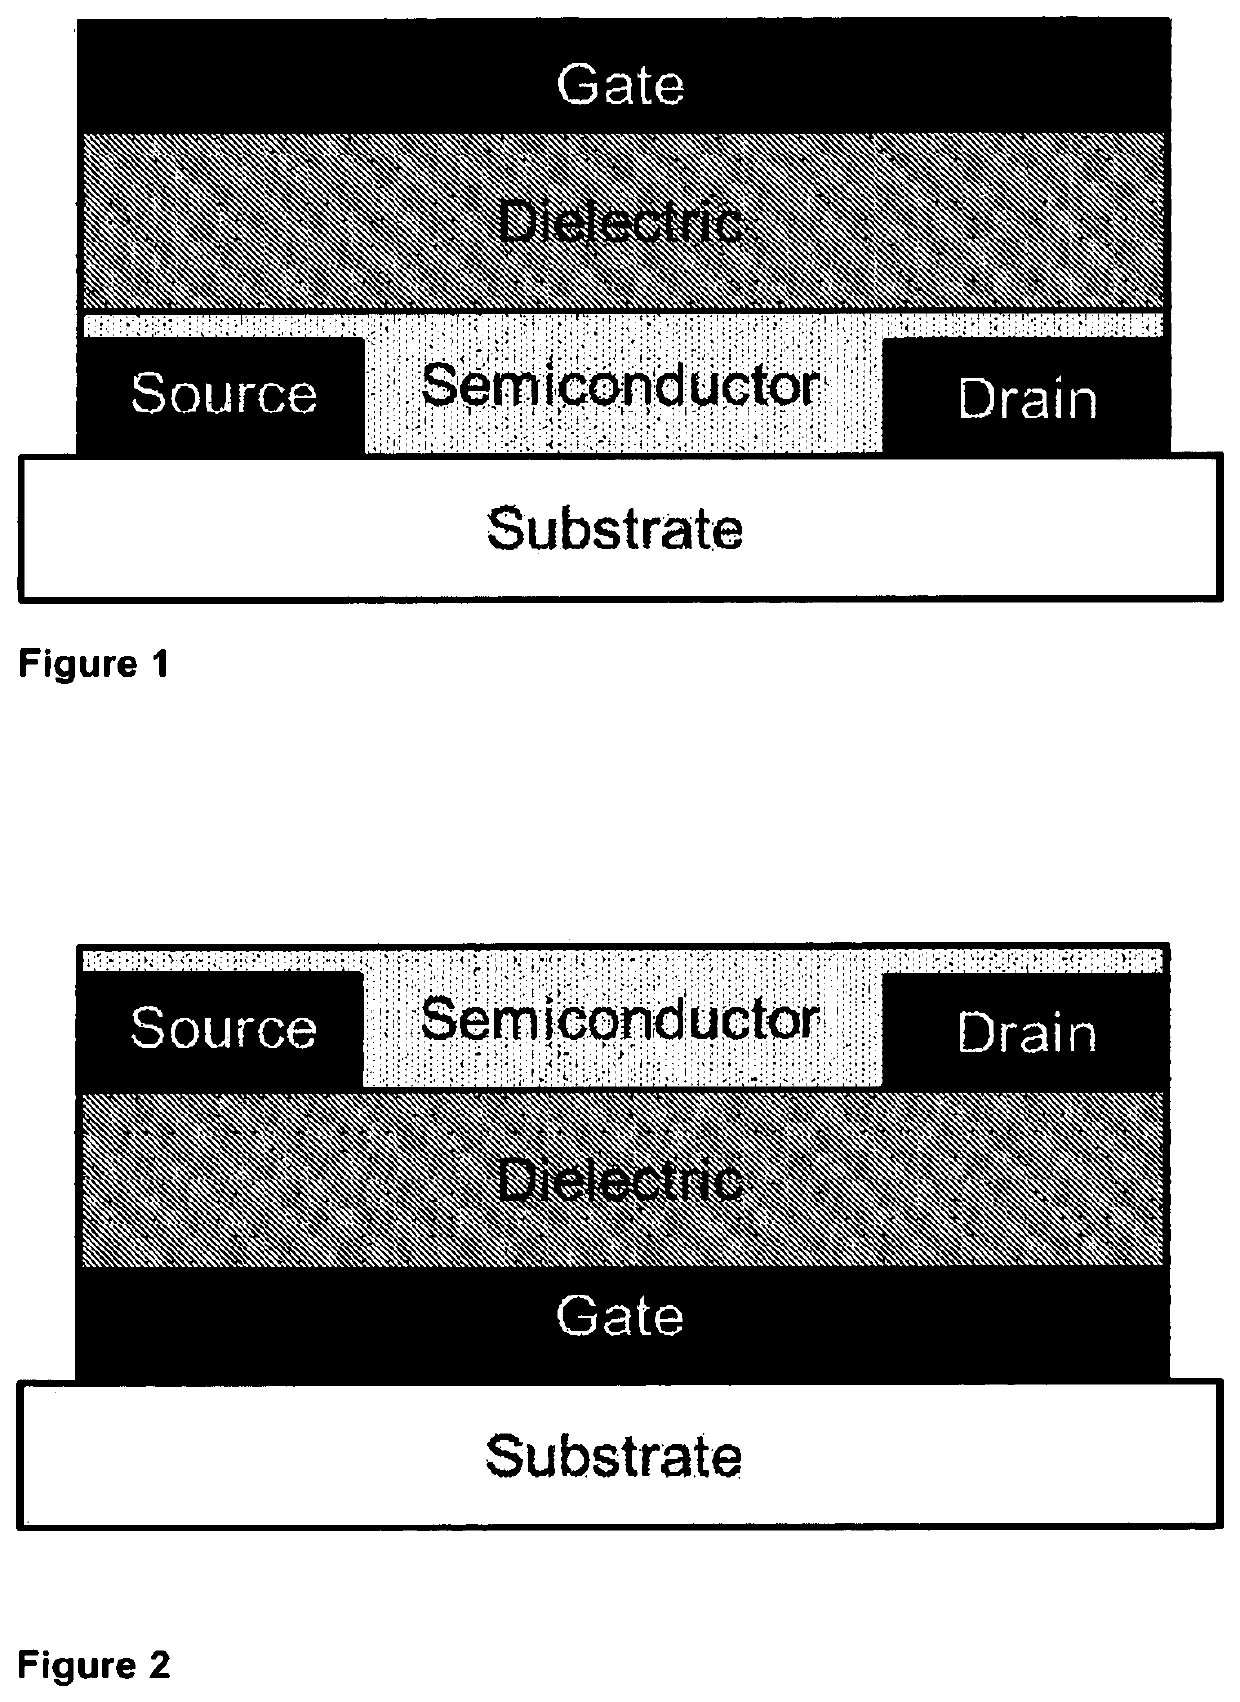 Crosslinkable polymeric materials for dielectric layers in electronic devices